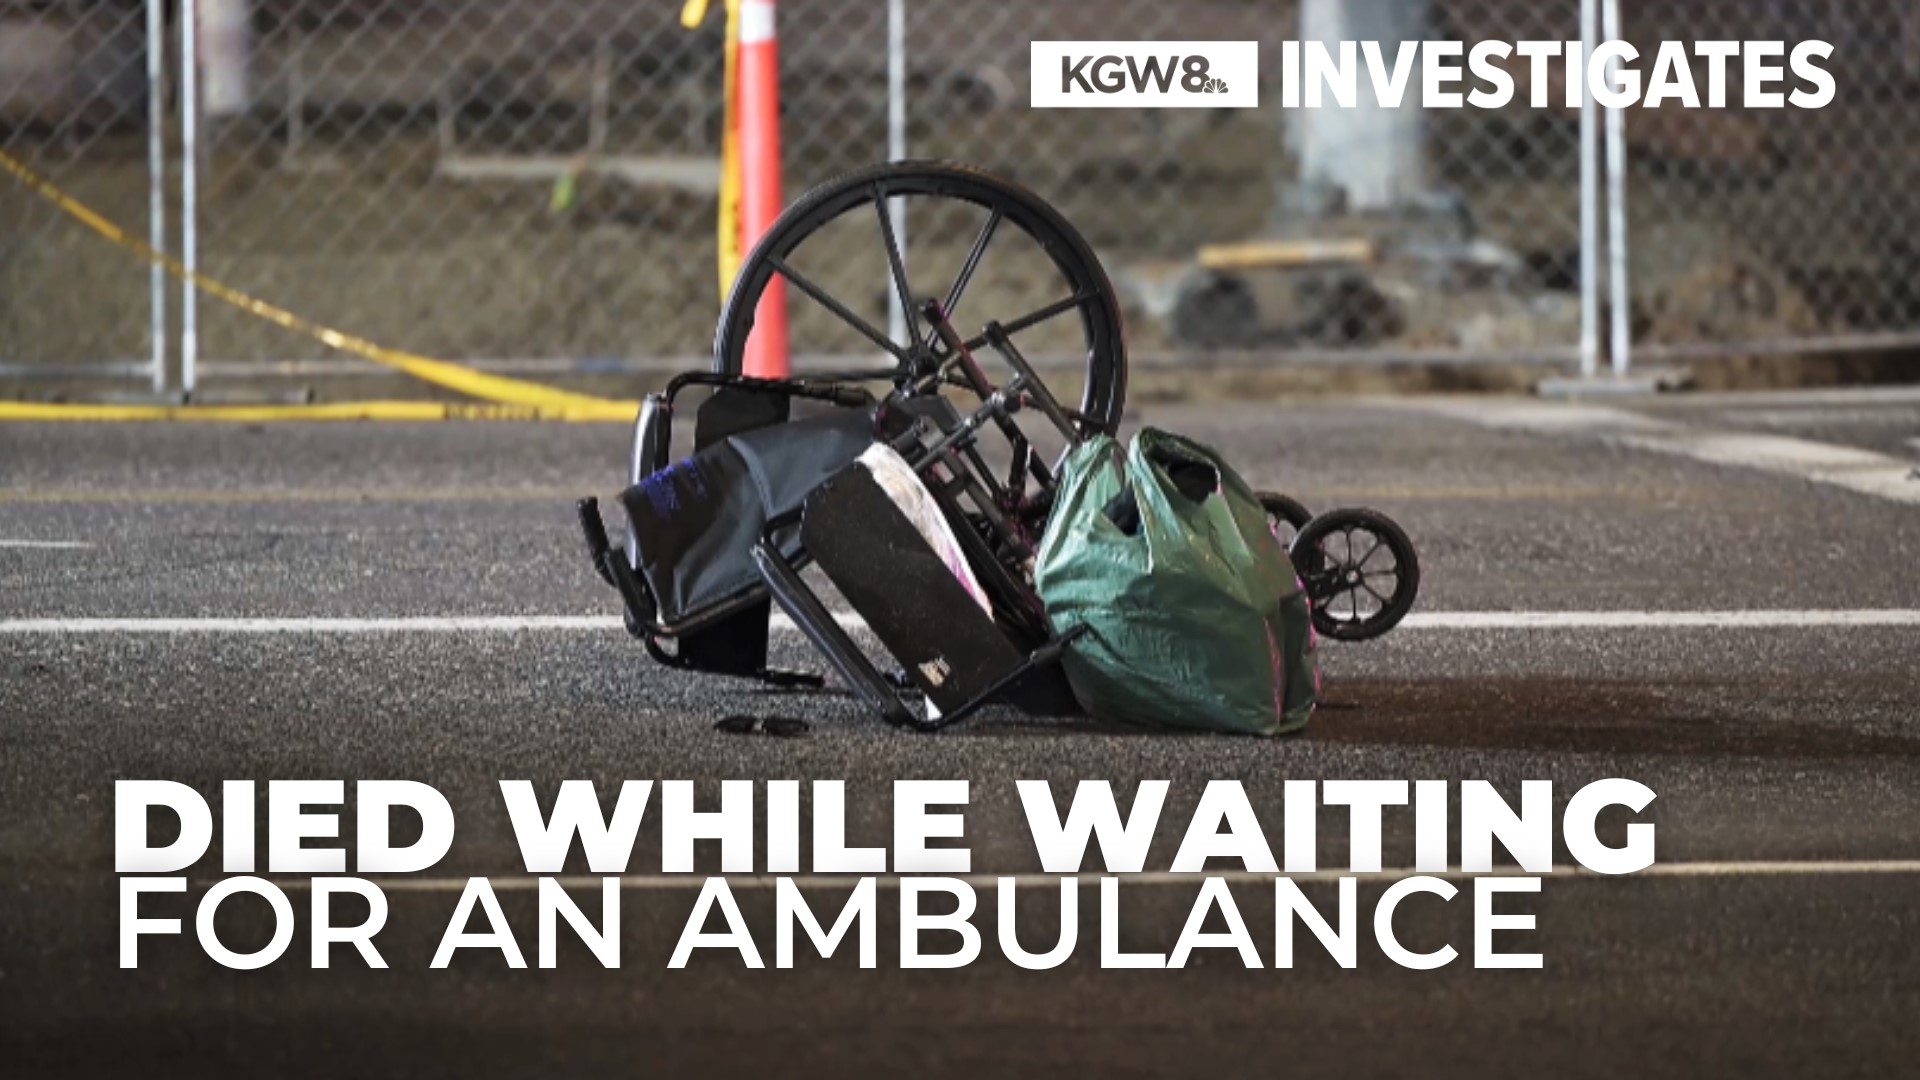 Portland police are still investigating a hit-and-run that killed a man on April 28. The man died on the street as firefighters waited for an ambulance to arrive.